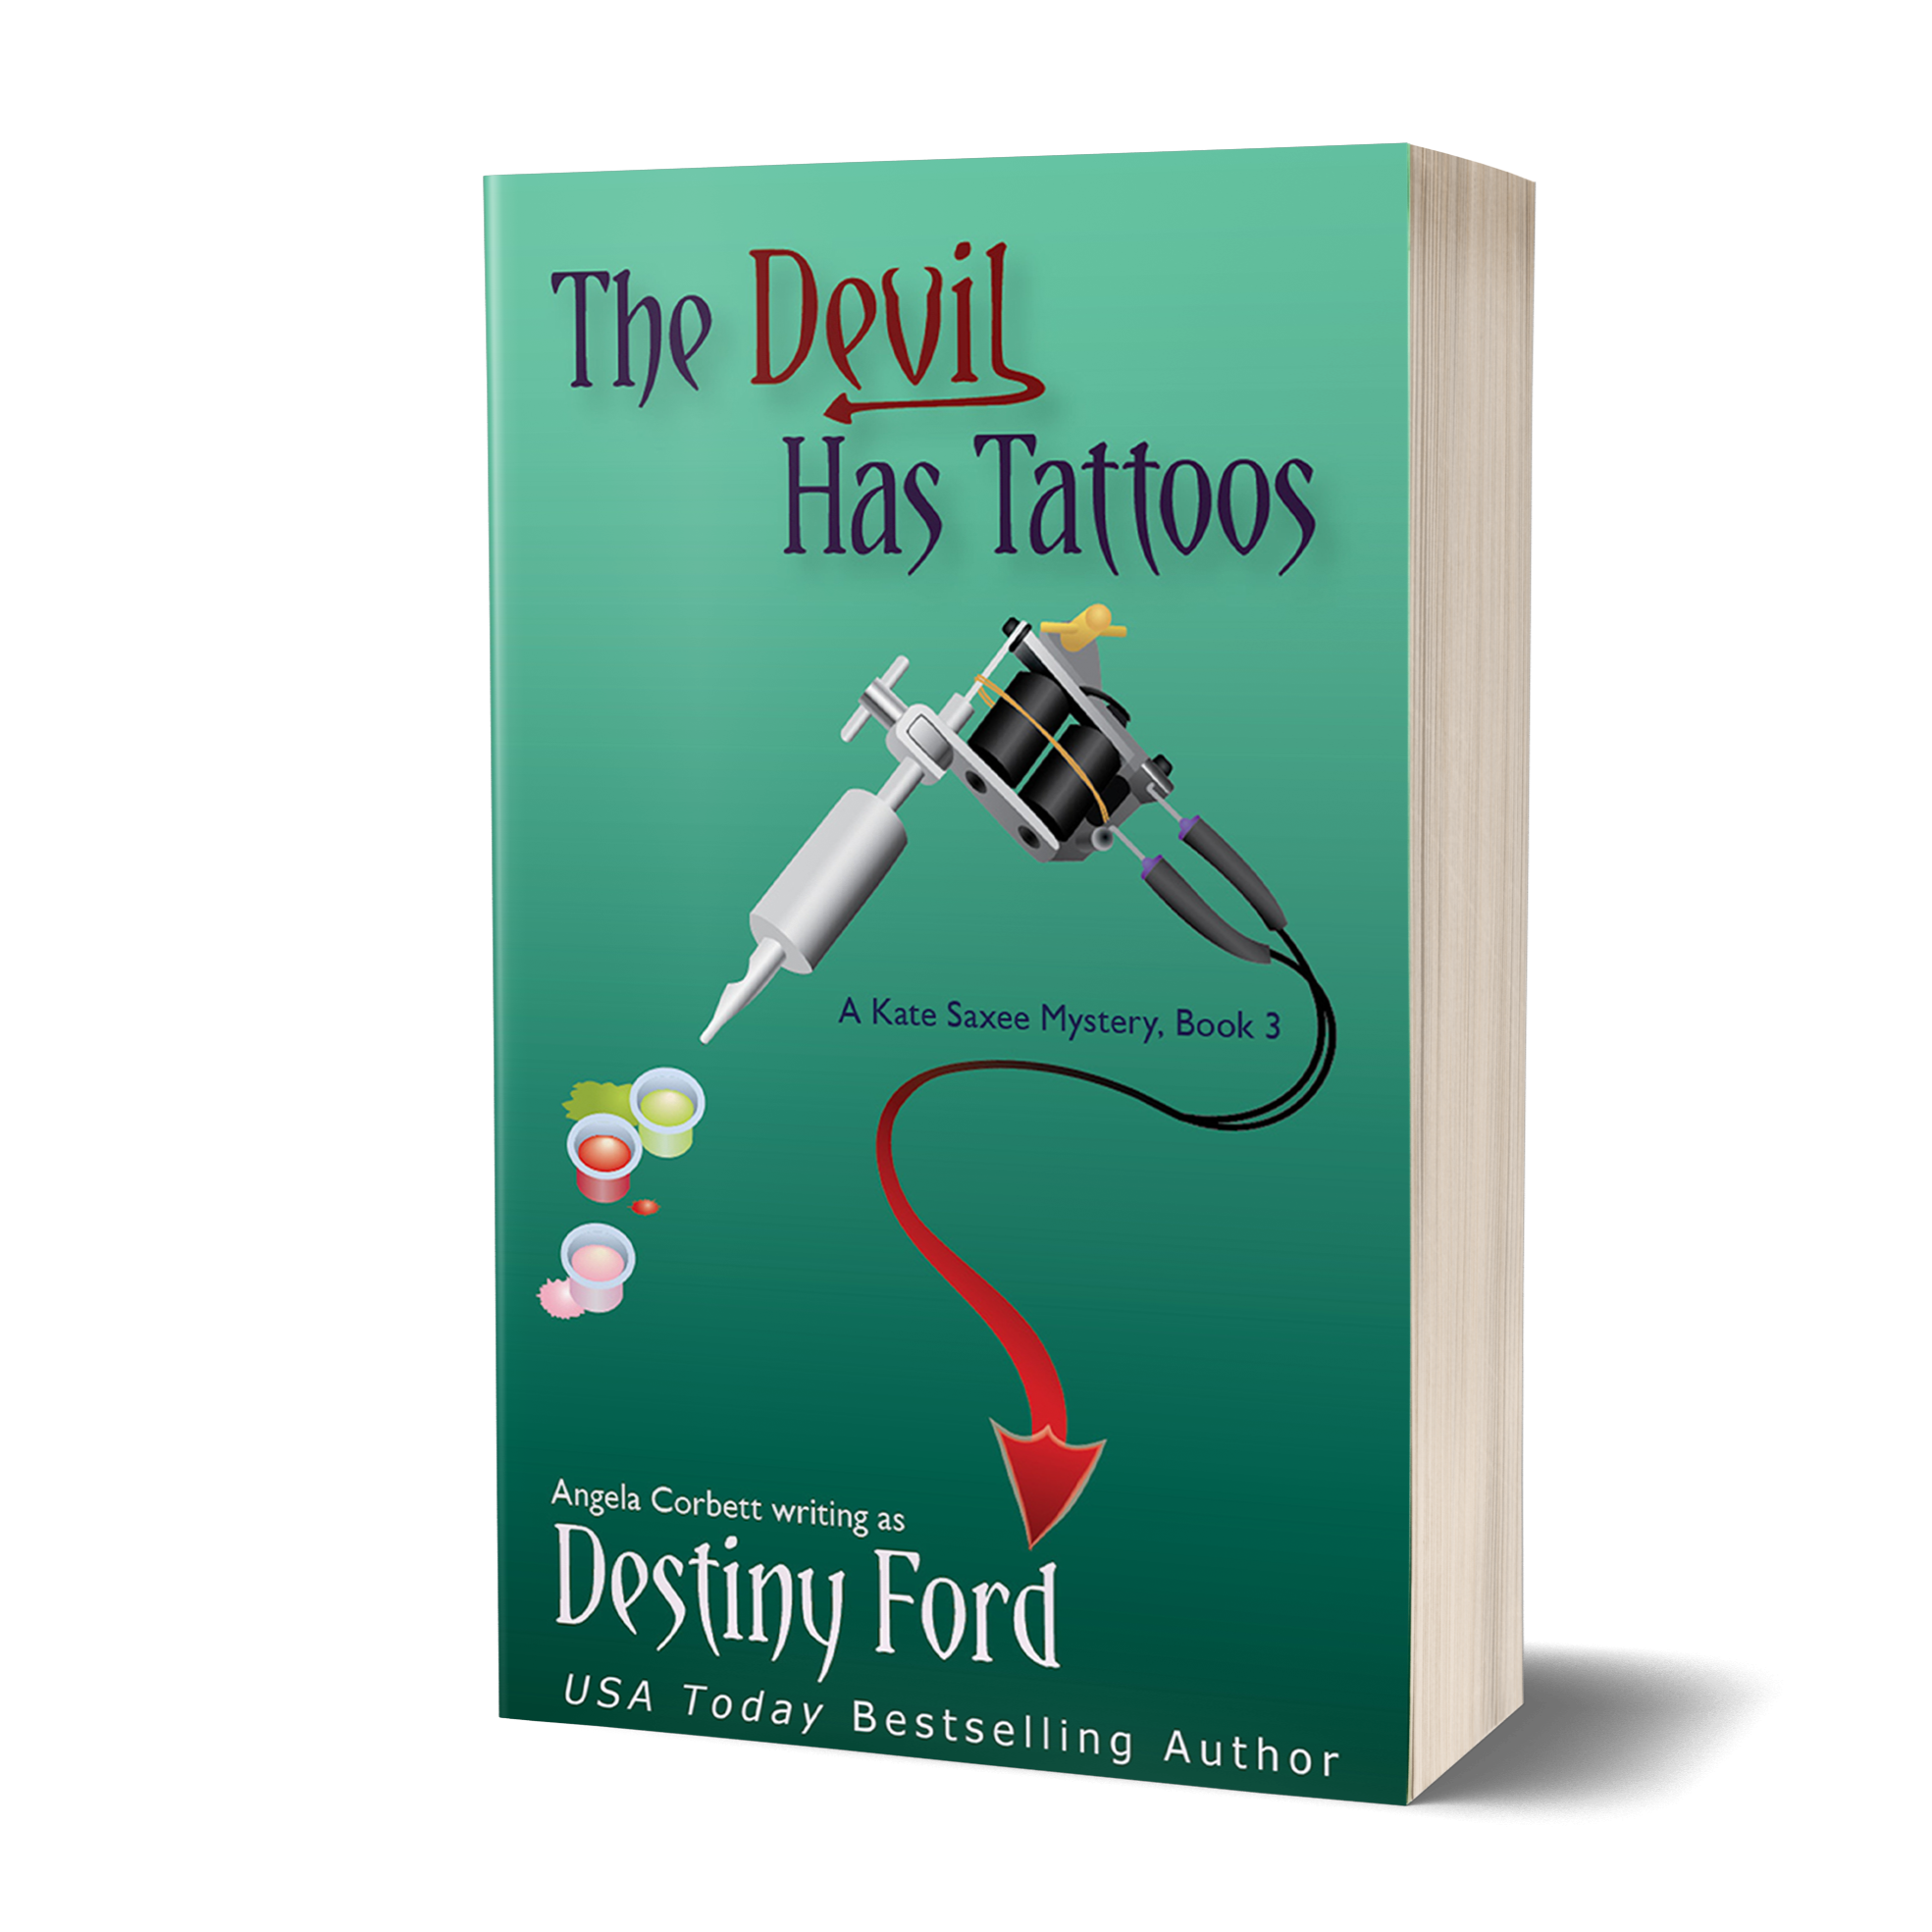 The Devil Has Tattoos, A Kate Saxee Mystery Series (Book 3)